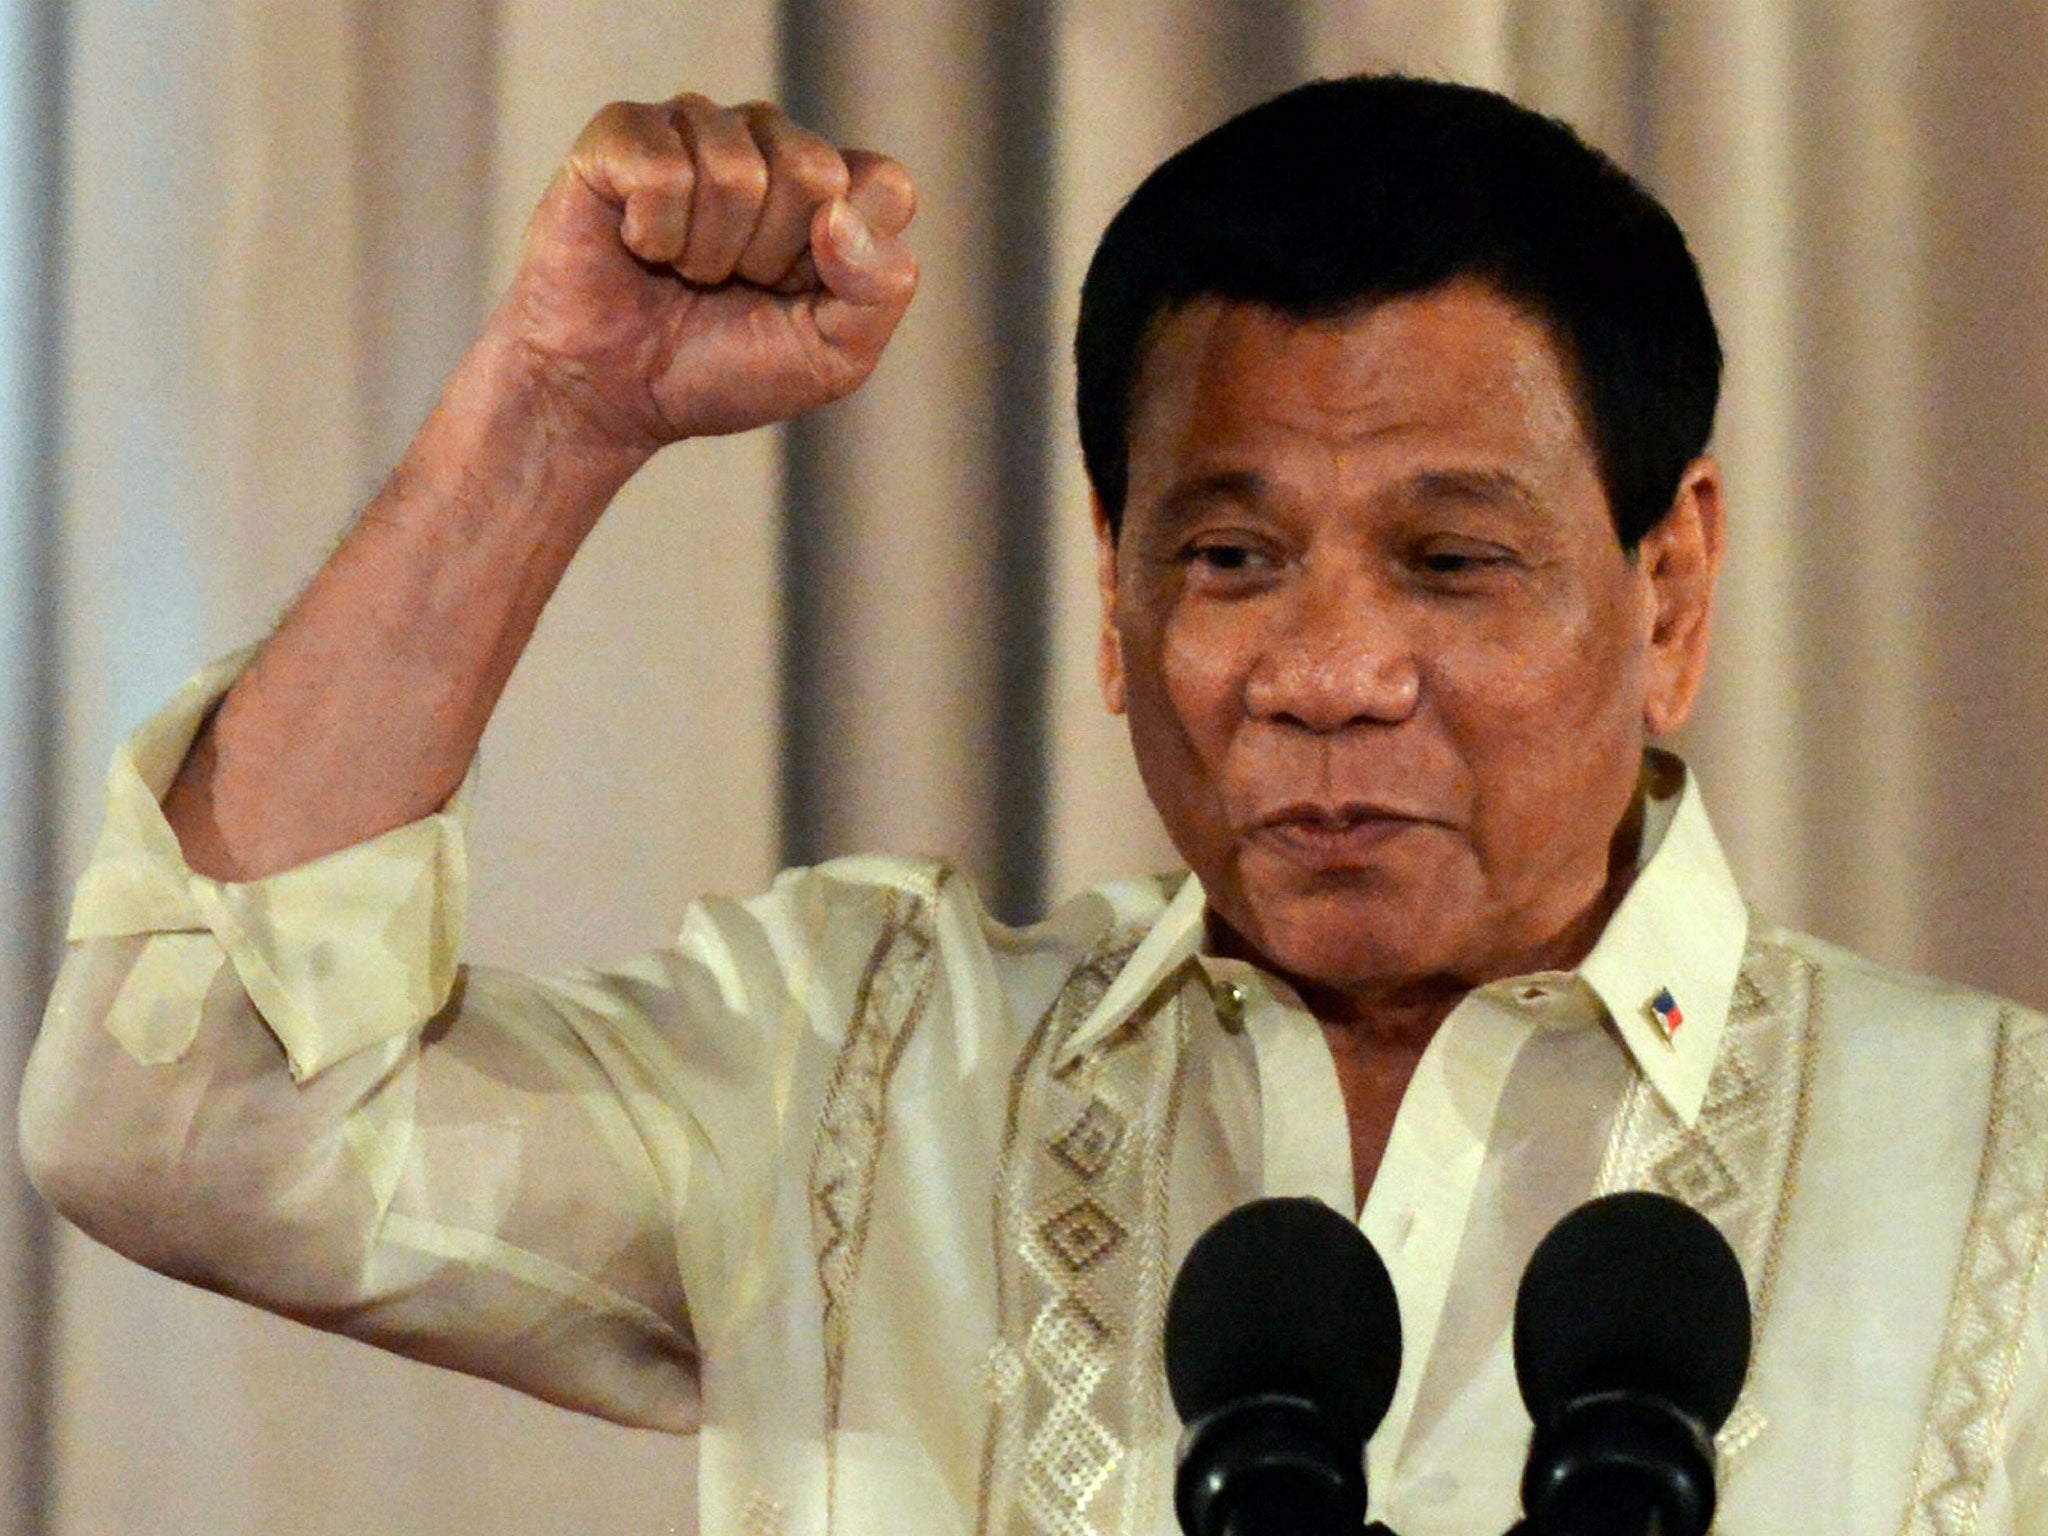 'I have limited warm bodies but so many wars to fight,' said Mr Duterte